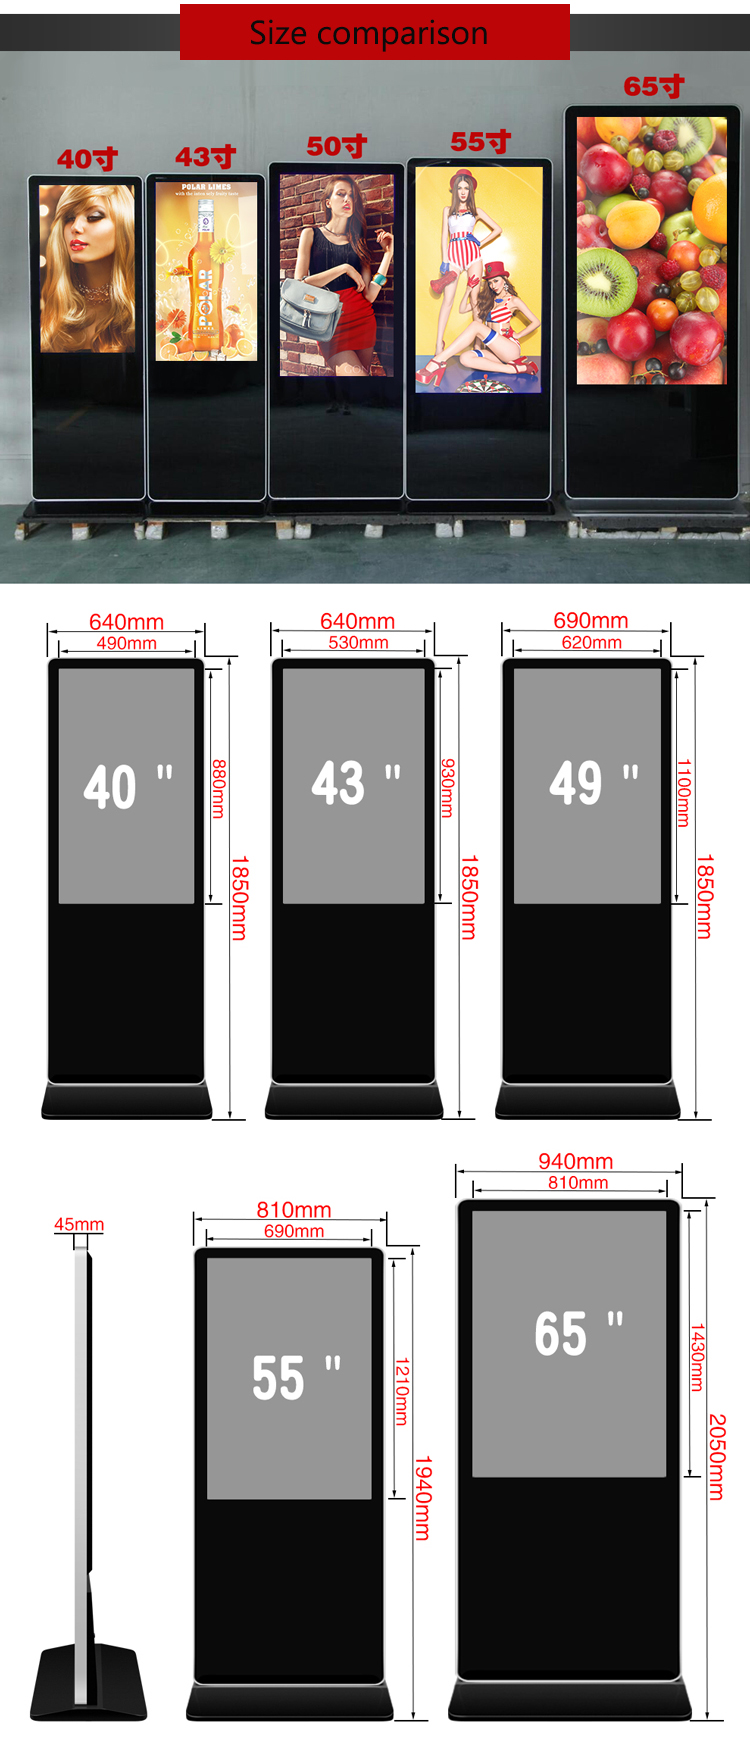 42 Inch floor stand digital signage multic touch table LCD Advertising android media palyer